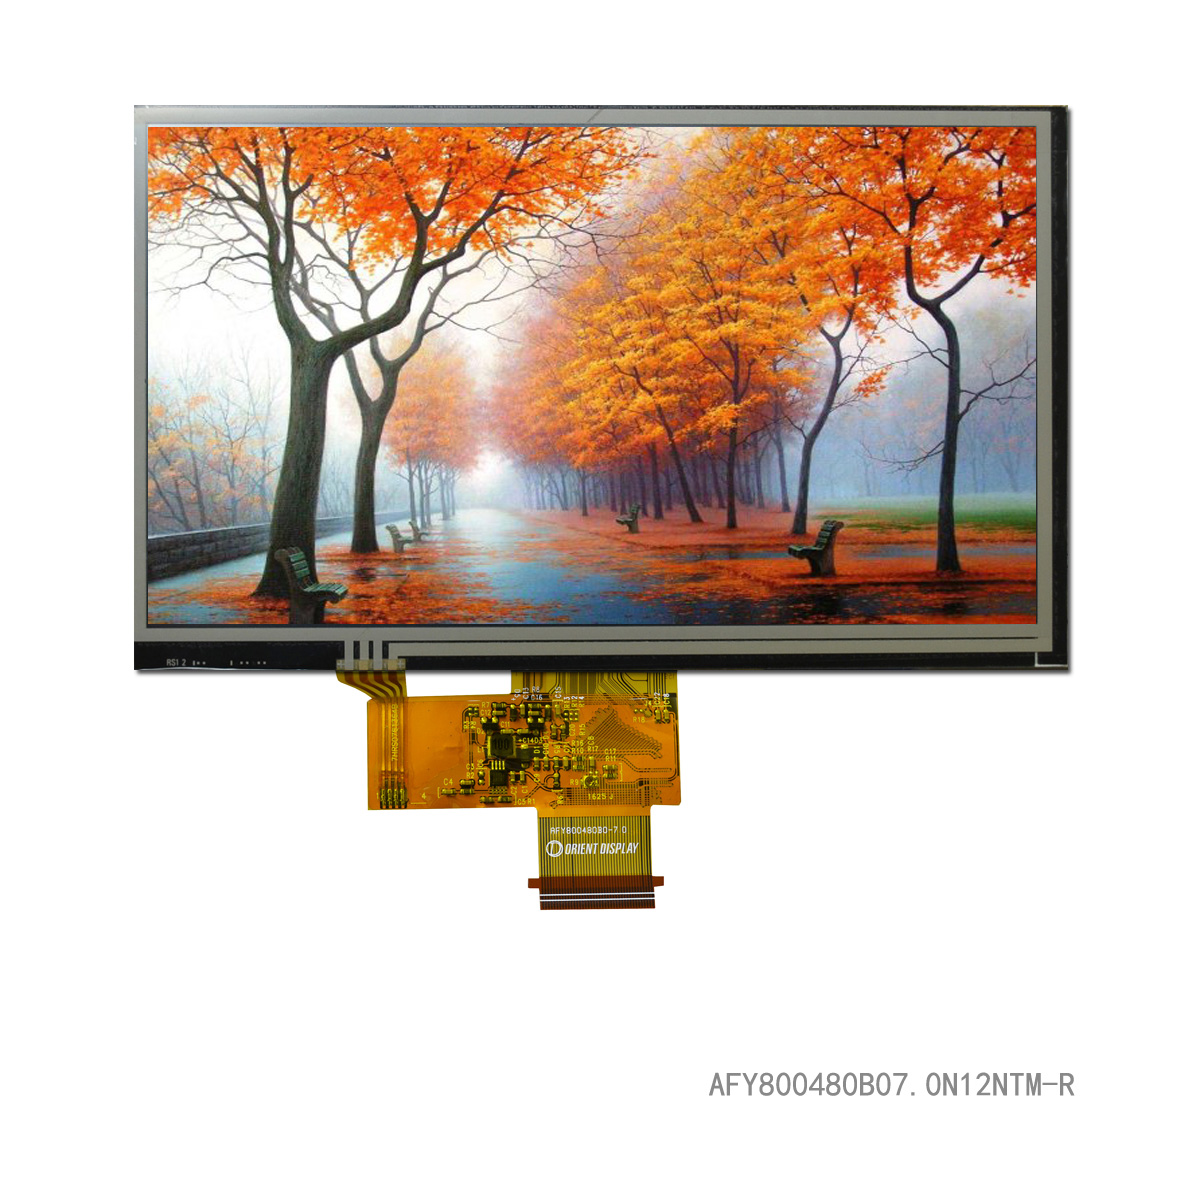 7 0 Tft 800x480 4 Nits With Resistive Touch Panel Store Orient Display